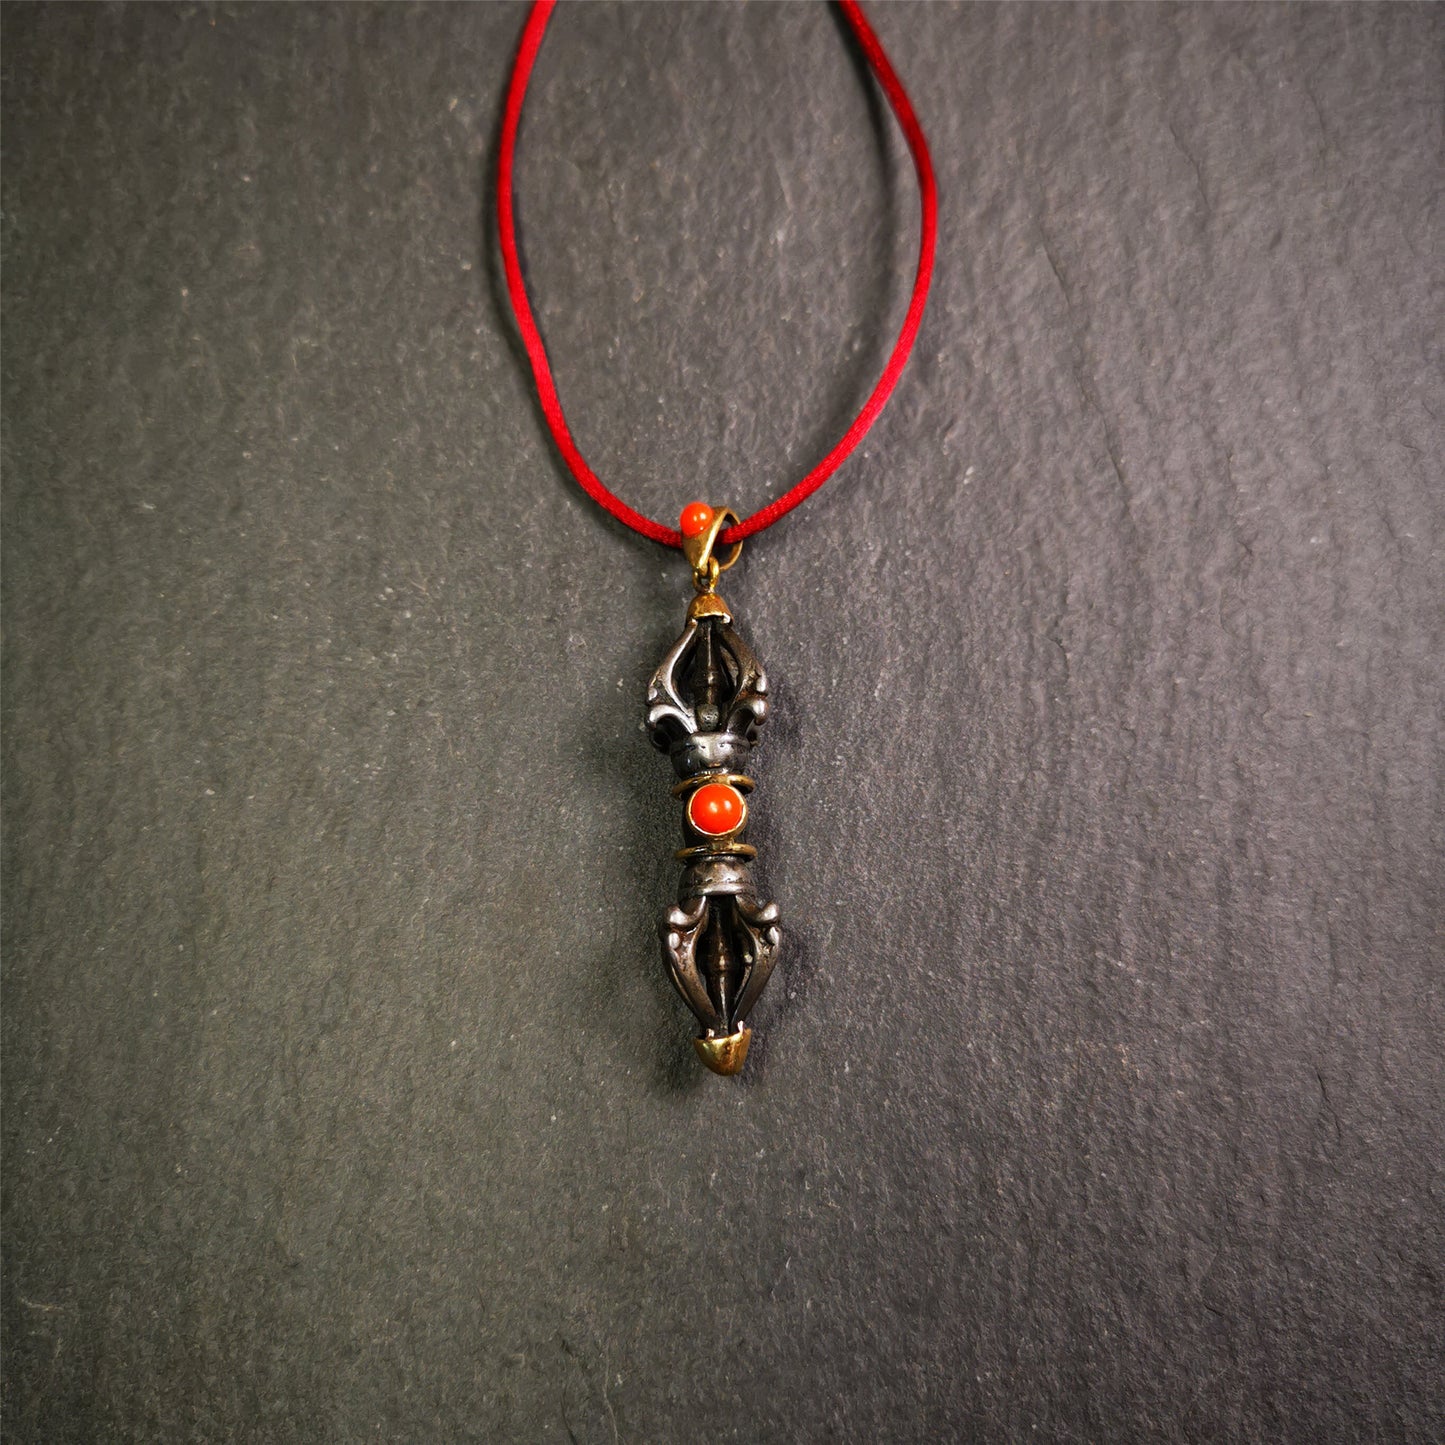 This unique vajra pendant was handmade by Tibetan craftsmen from Tibet in 1990's,from Hepo Town, Baiyu County, the birthplace of the famous Tibetan handicrafts. It is five-pronged Vajra,made of cold iron, 1.77 inch height.Comes with leather cord. You can make it a necklace, pendant, keychain, mala pendant, or just as an ornament on your desk.